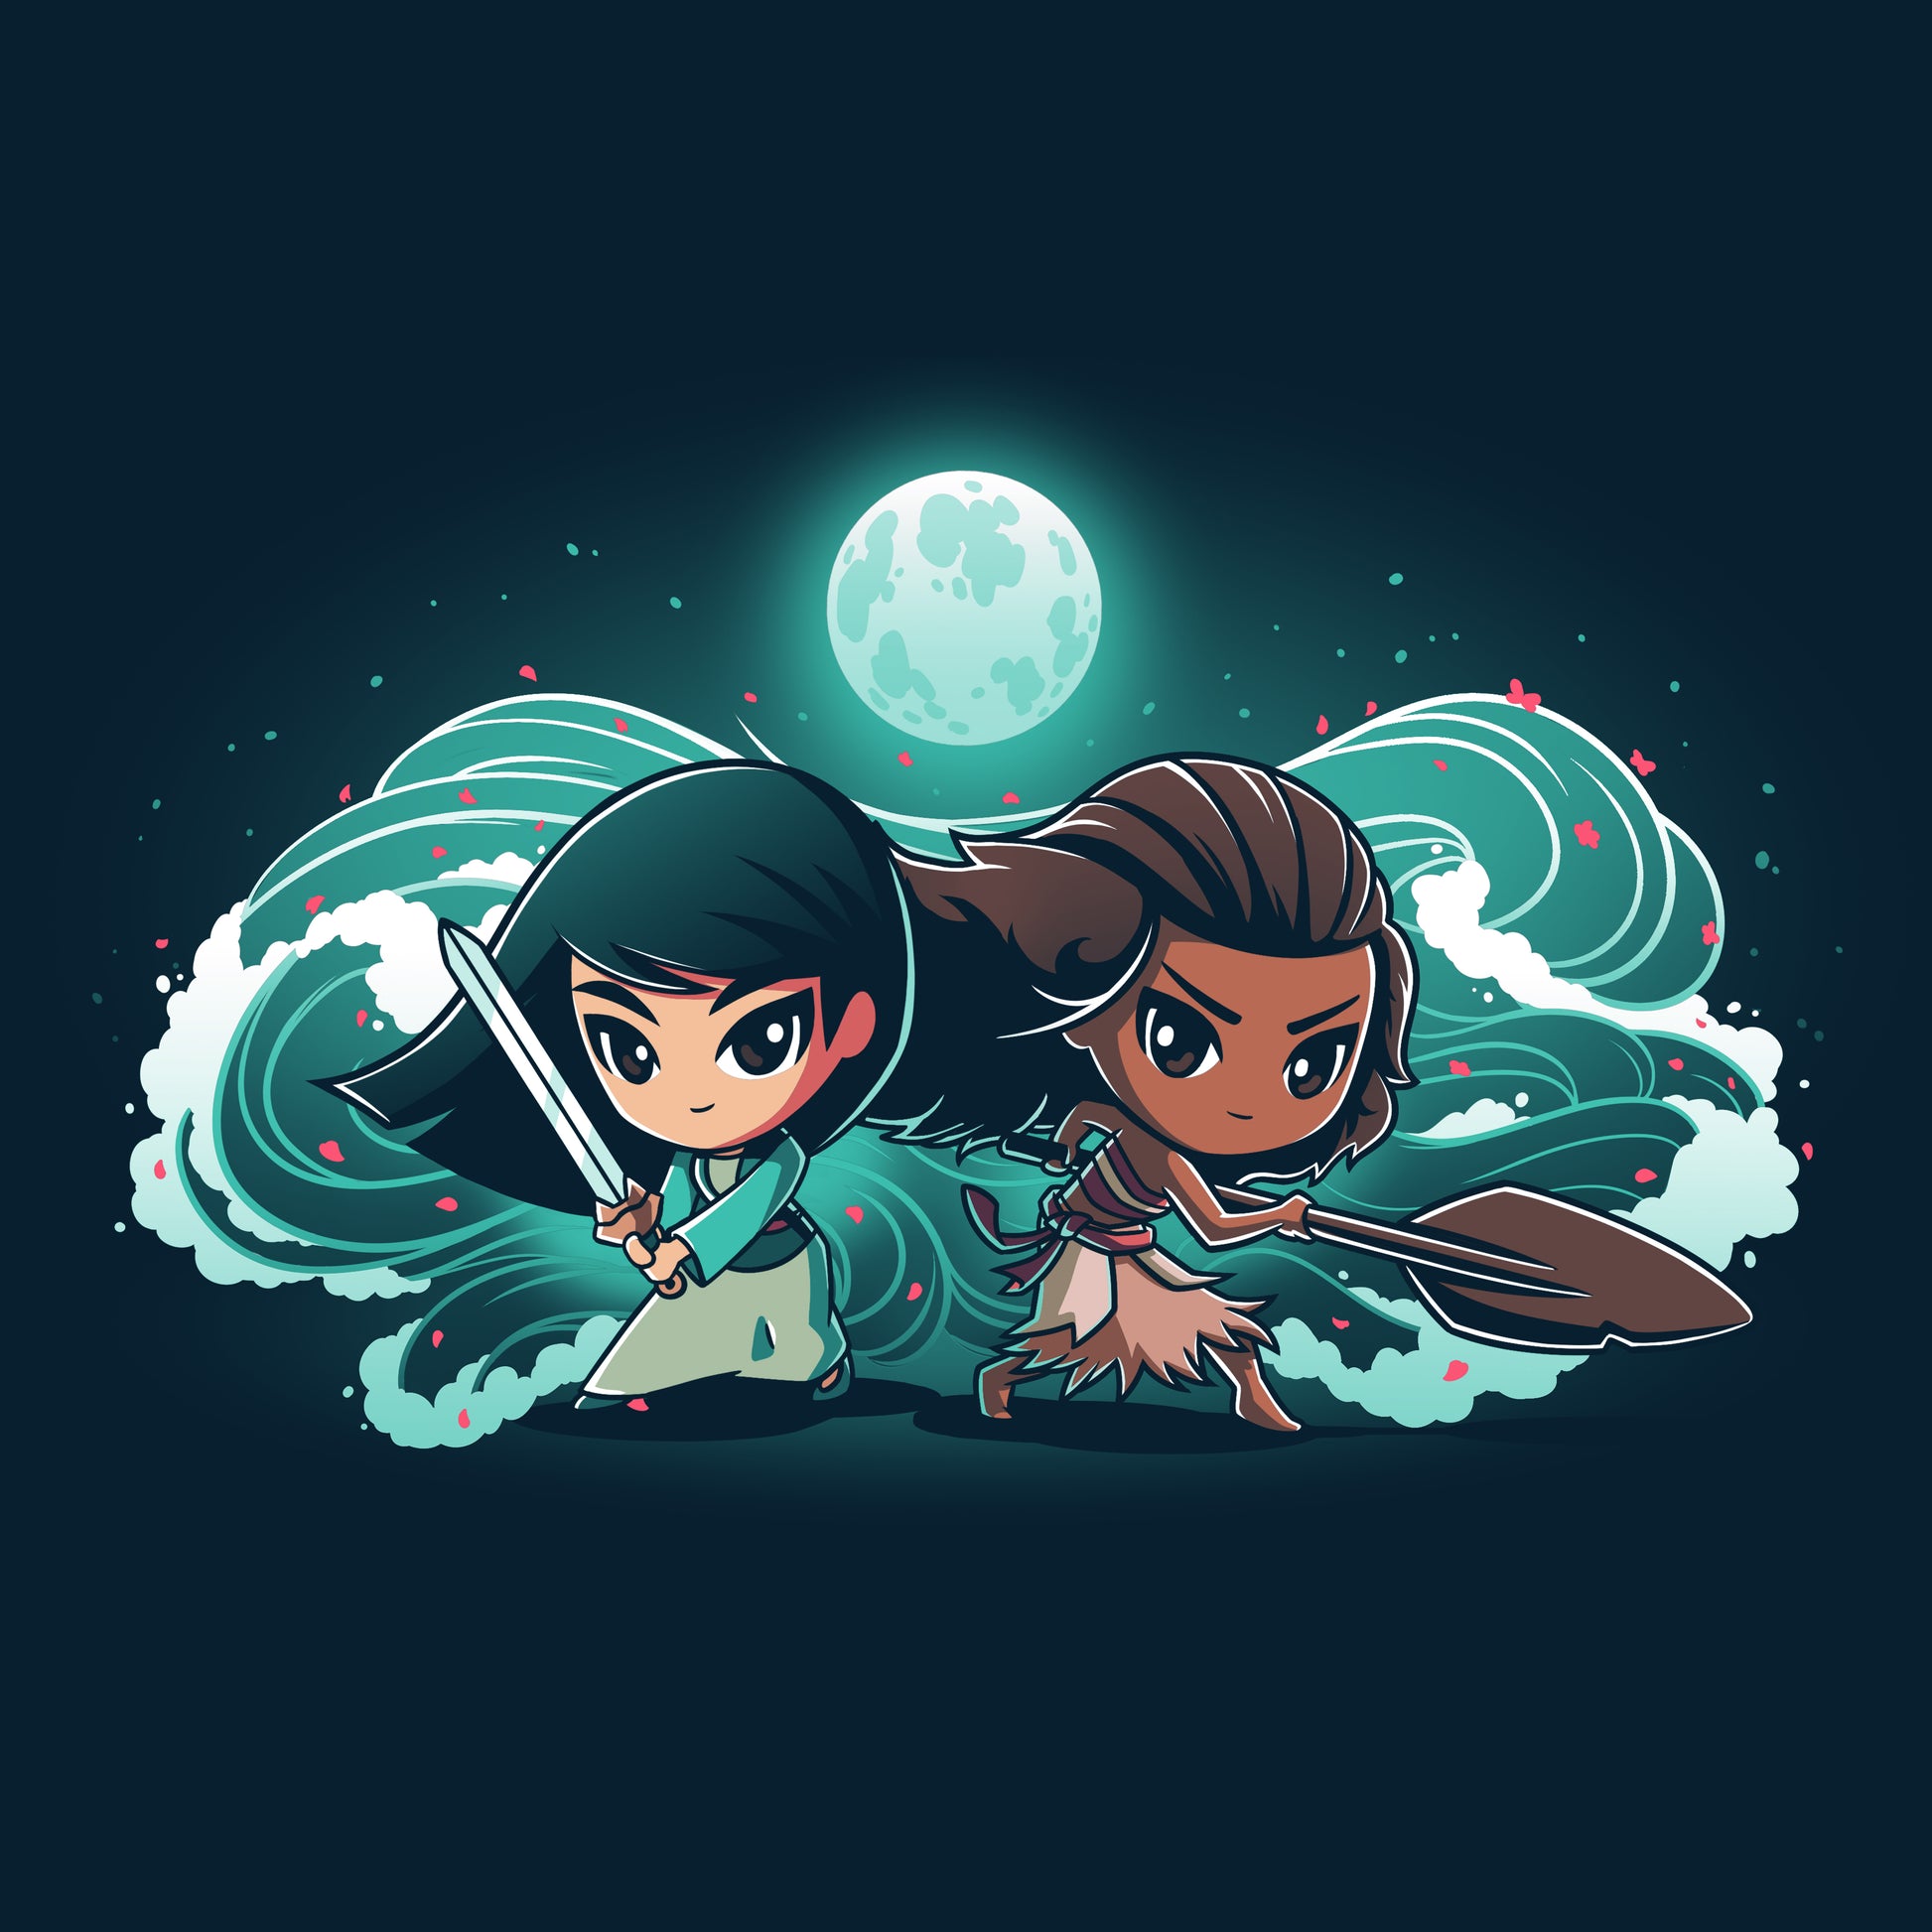 Officially licensed Disney T-shirt featuring Mulan and Moana brandishing swords in the water.